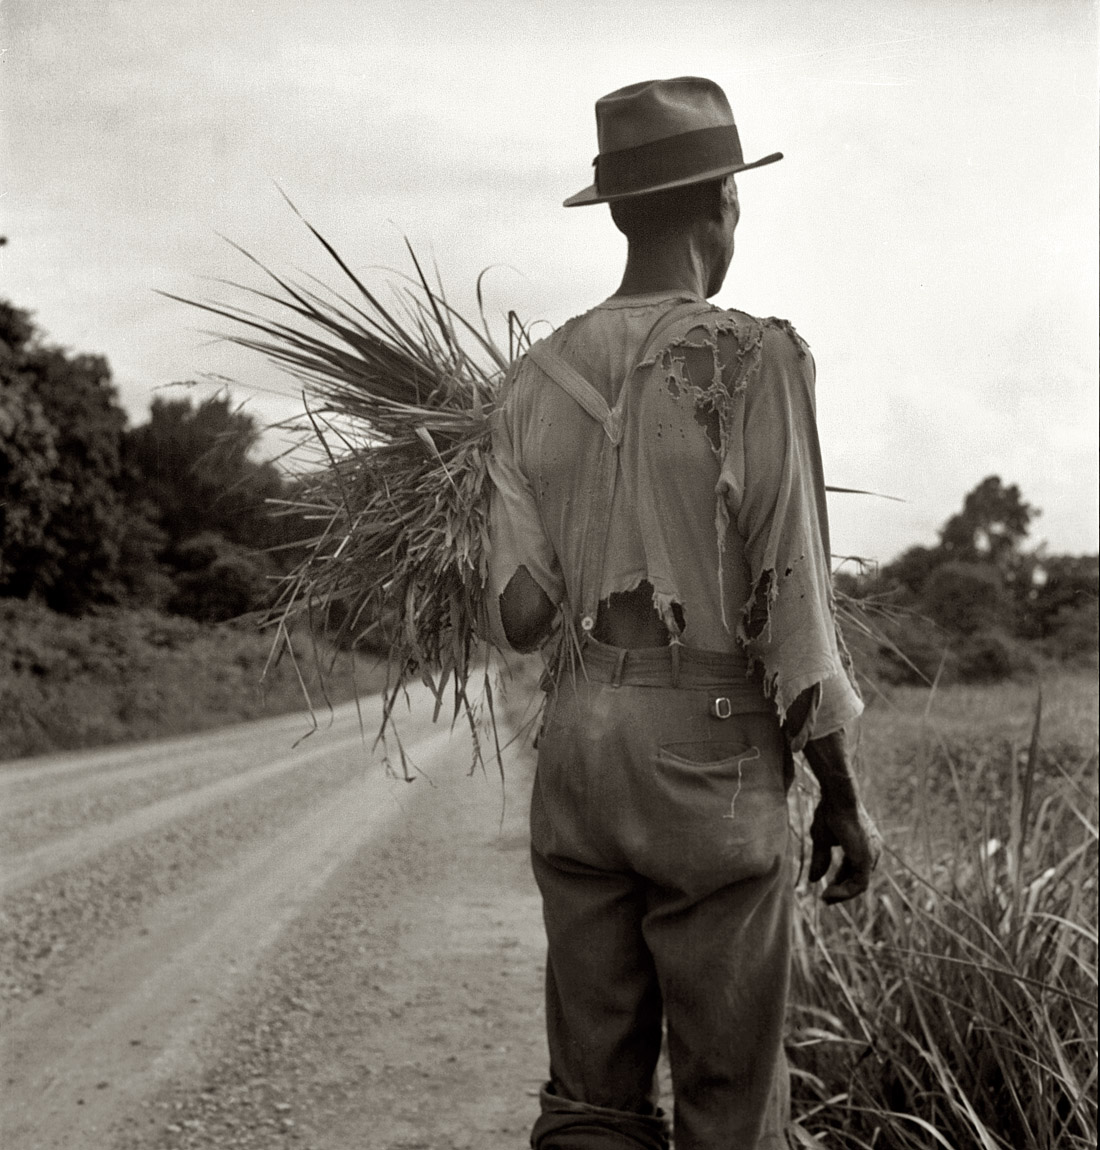 July 1936. "Old-time Negro living on a cotton patch near Vicksburg, Mississippi." View full size. Medium-format nitrate negative by Dorothea Lange.